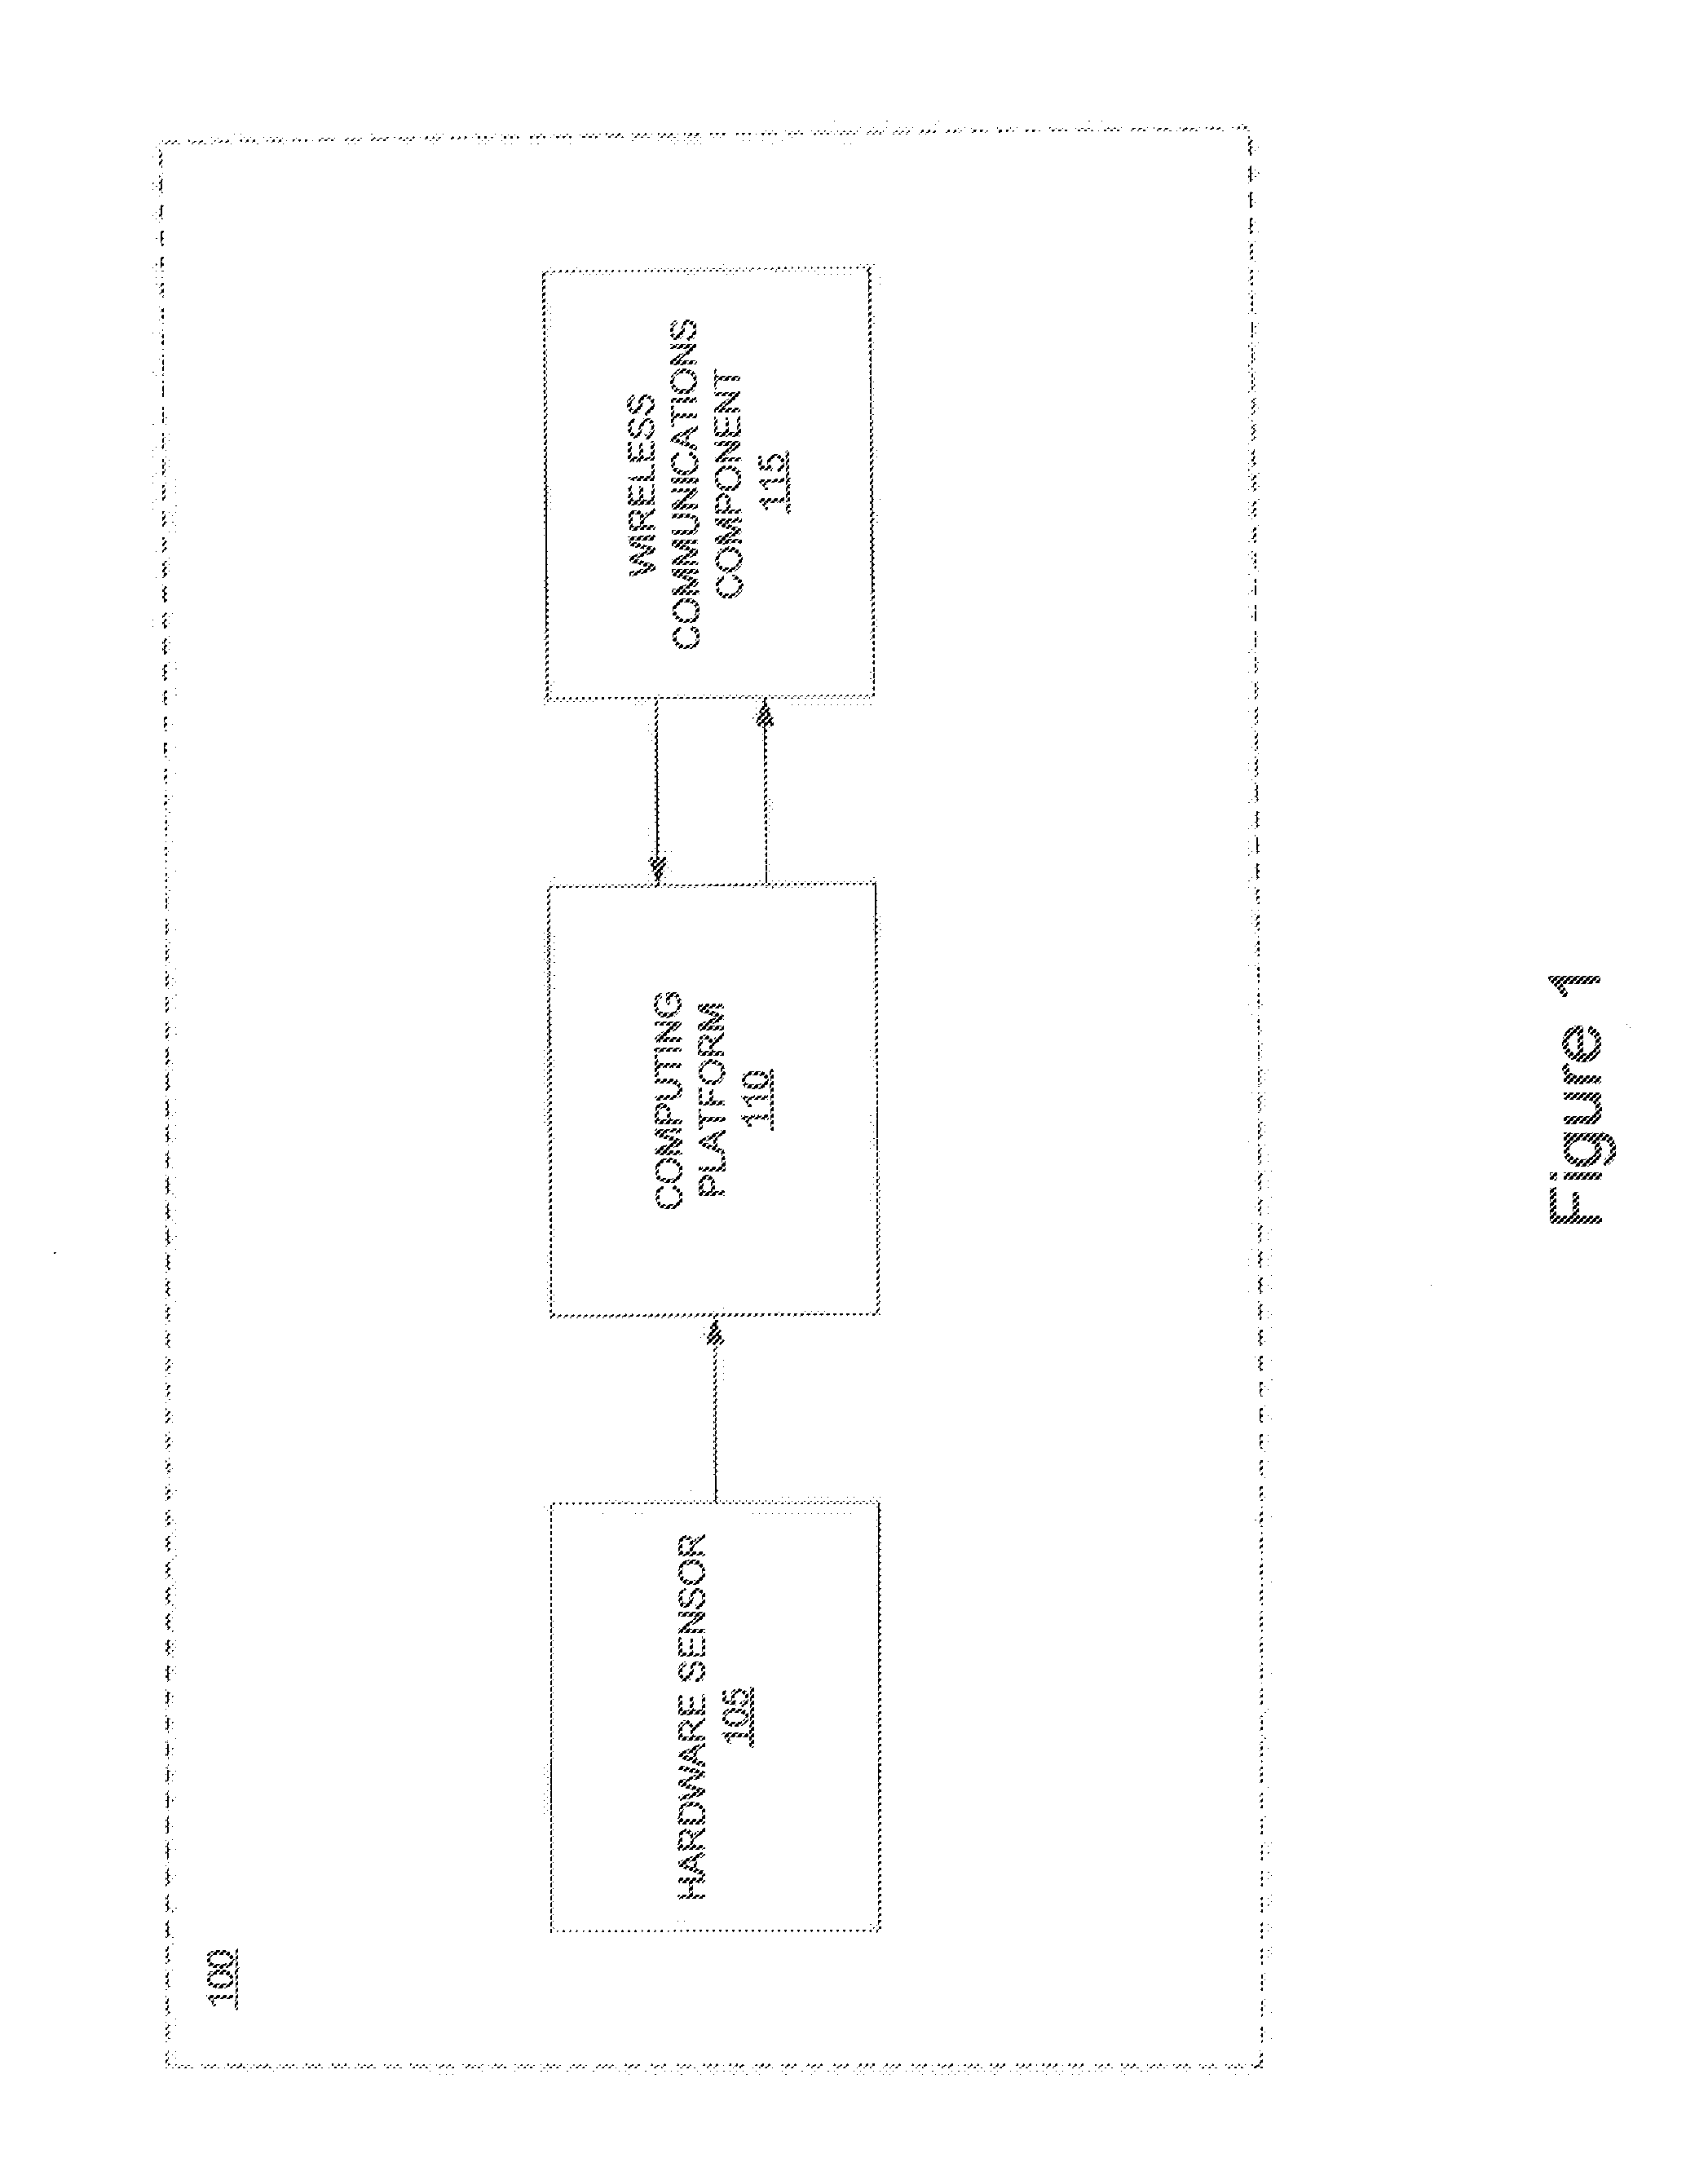 System and method for performing a secure cryptographic operation on a mobile device selecting data from multiple sensors